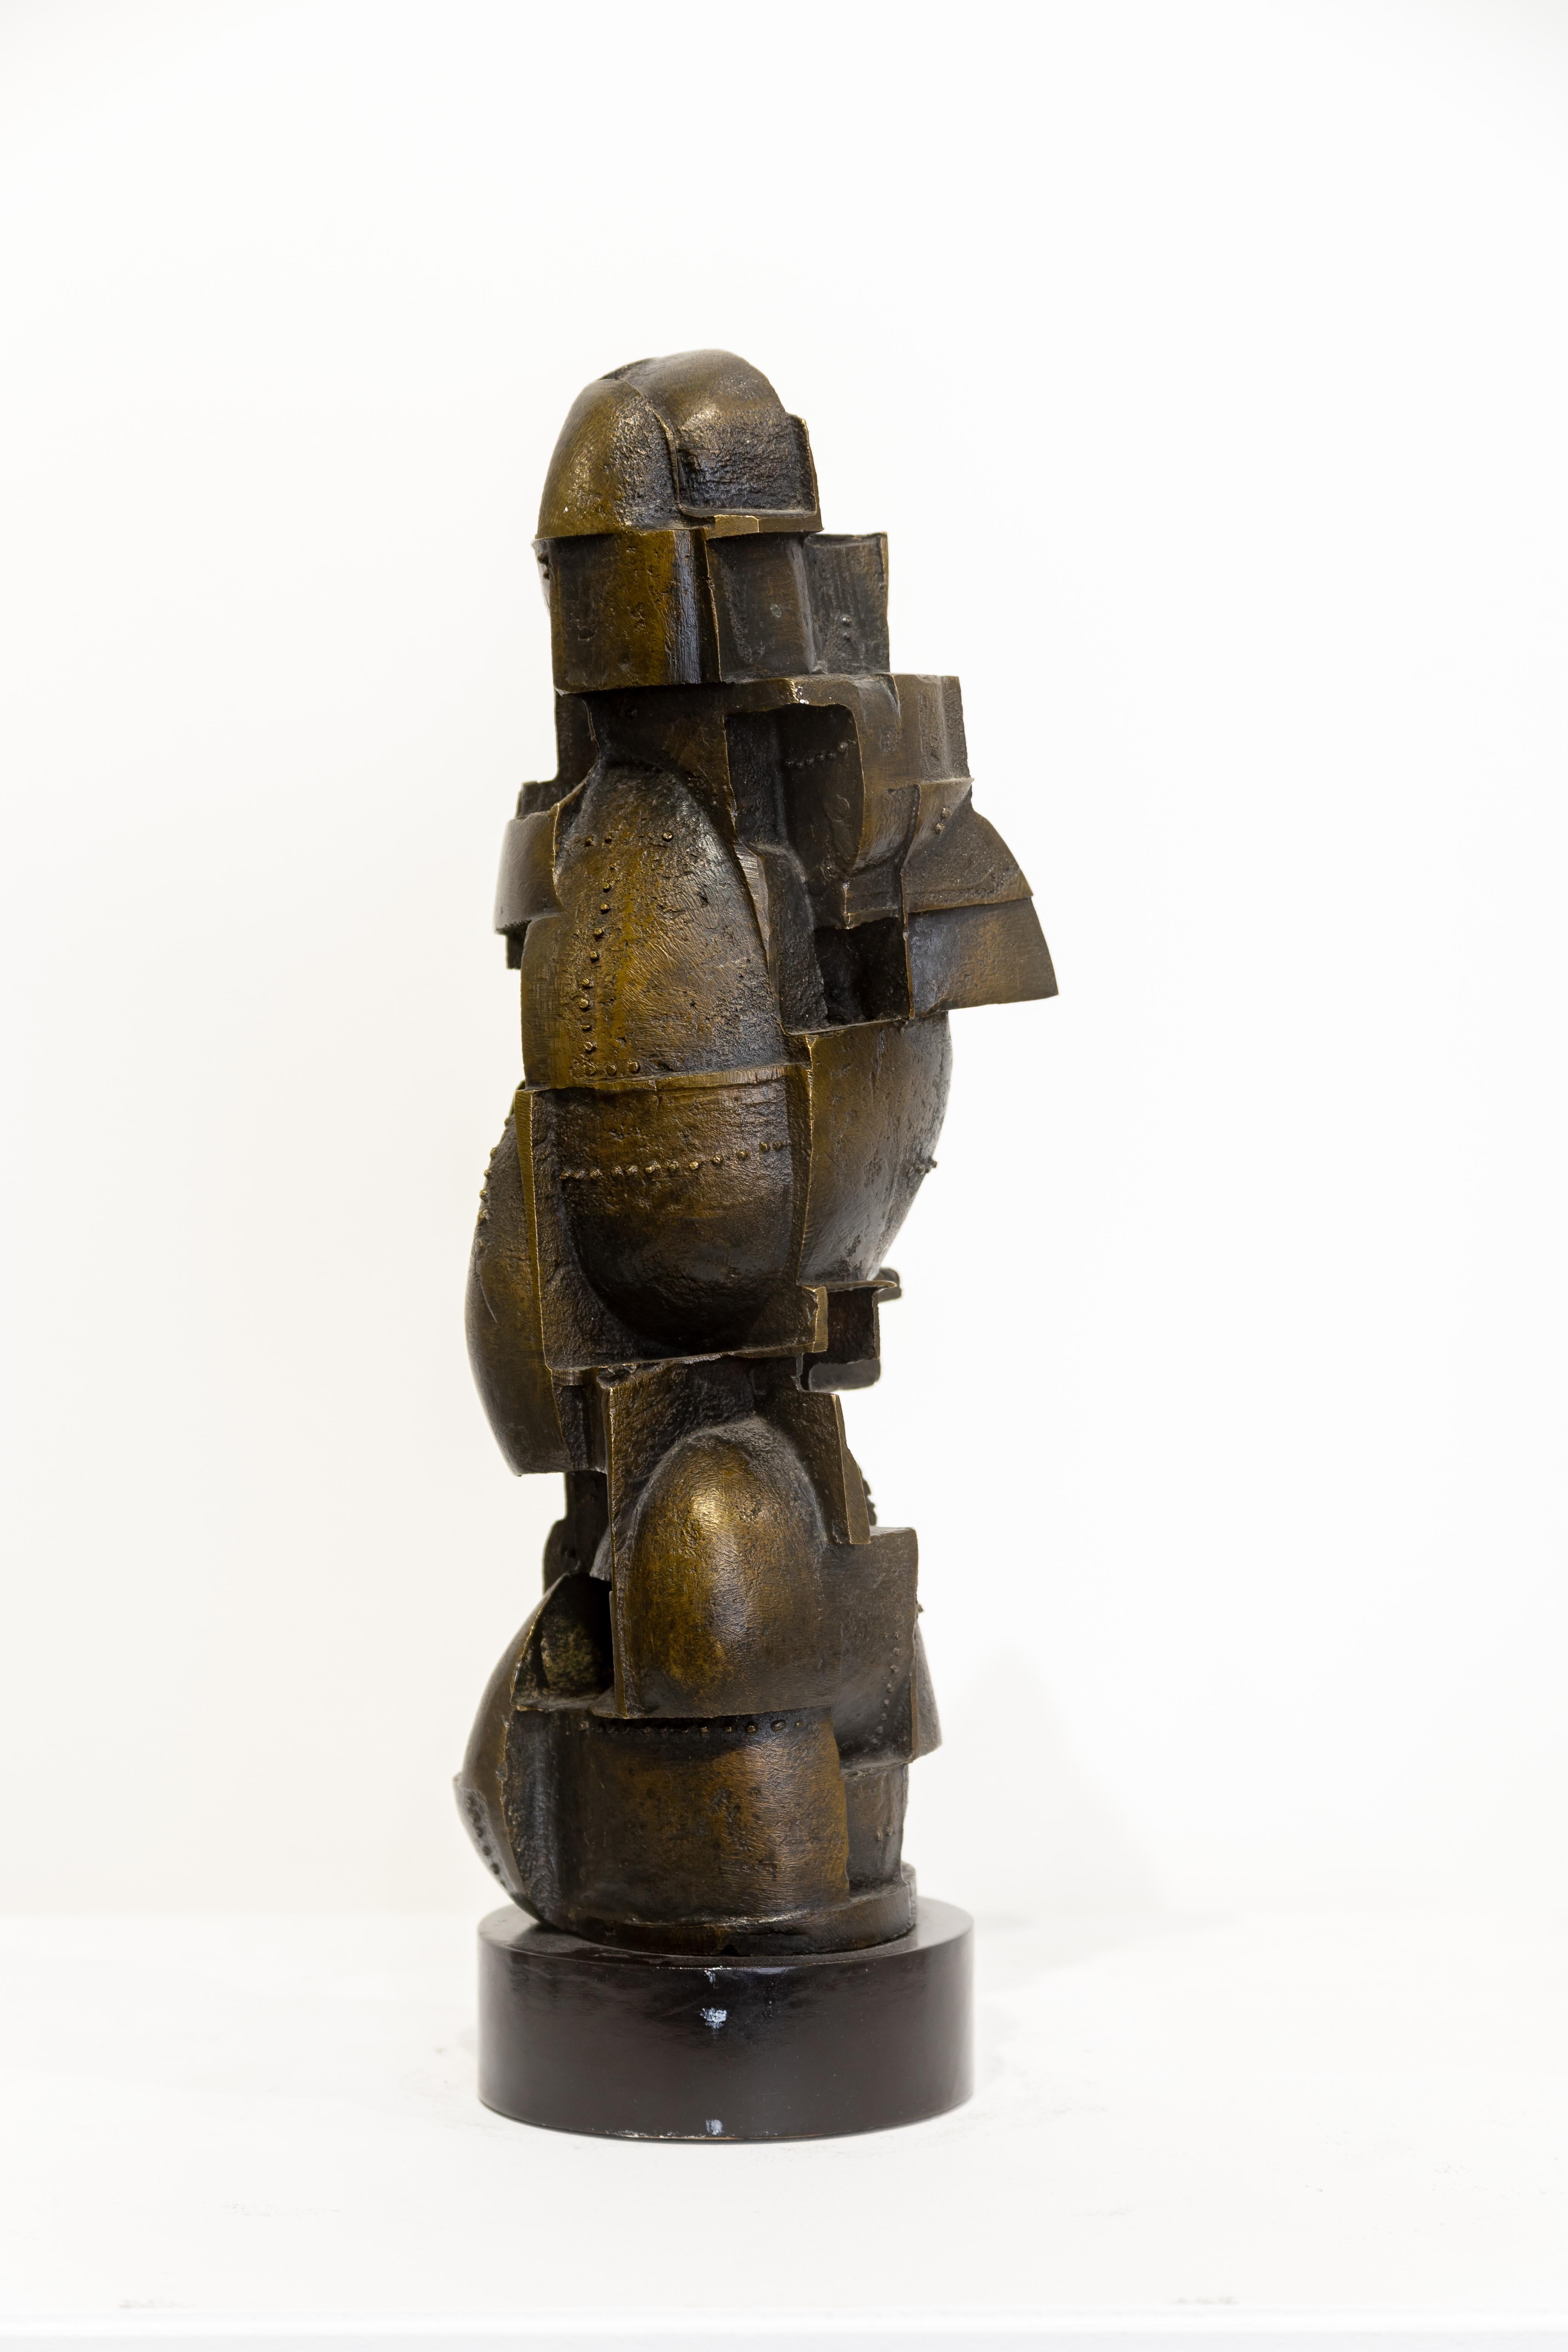 SALE ONE WEEK ONLY

Schmidt mainly worked in cast iron and bronze. This work reflects the influences of ancient cultures, natural forms, and the machinery of the modern age. Synthesizing these elements, his sculptures were an exploration of the